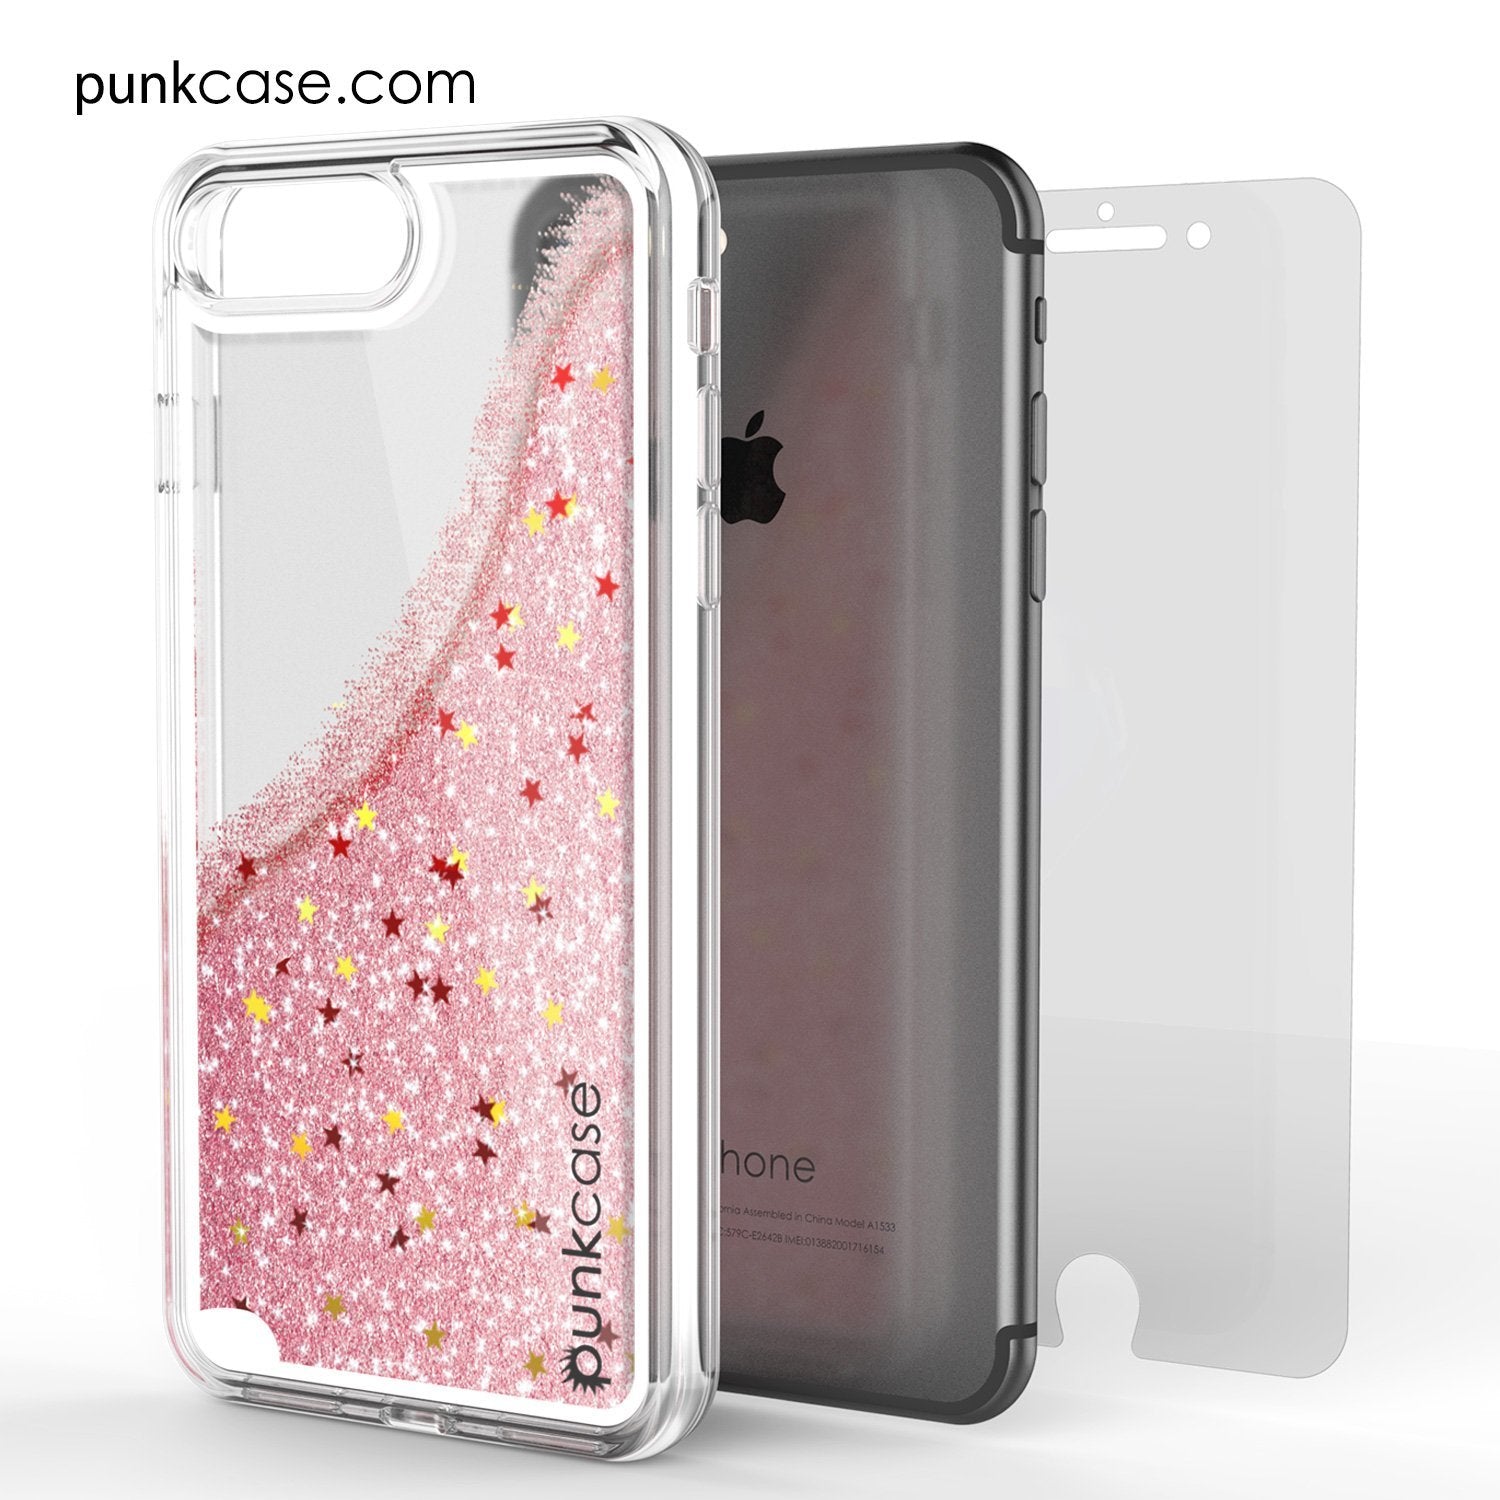 iPhone 8+ Plus Case, PunkCase LIQUID Rose Series, Protective Dual Layer Floating Glitter Cover - PunkCase NZ